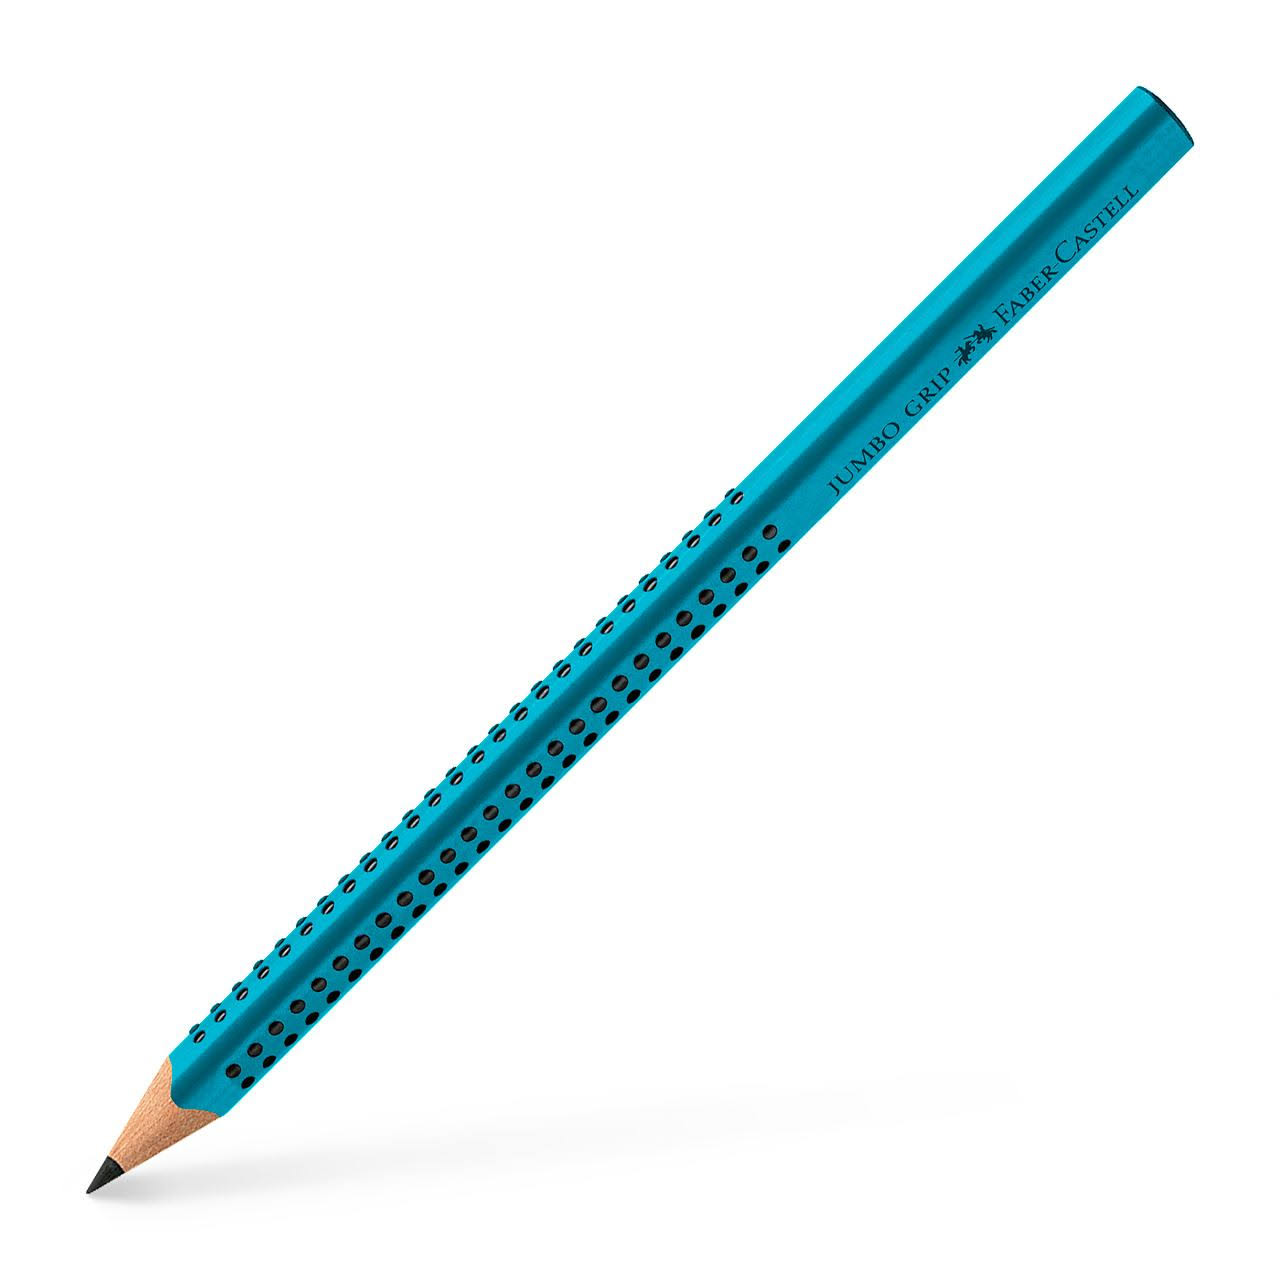 Faber-Castell Jumbo Grip Graphite Pencil, Turquoise